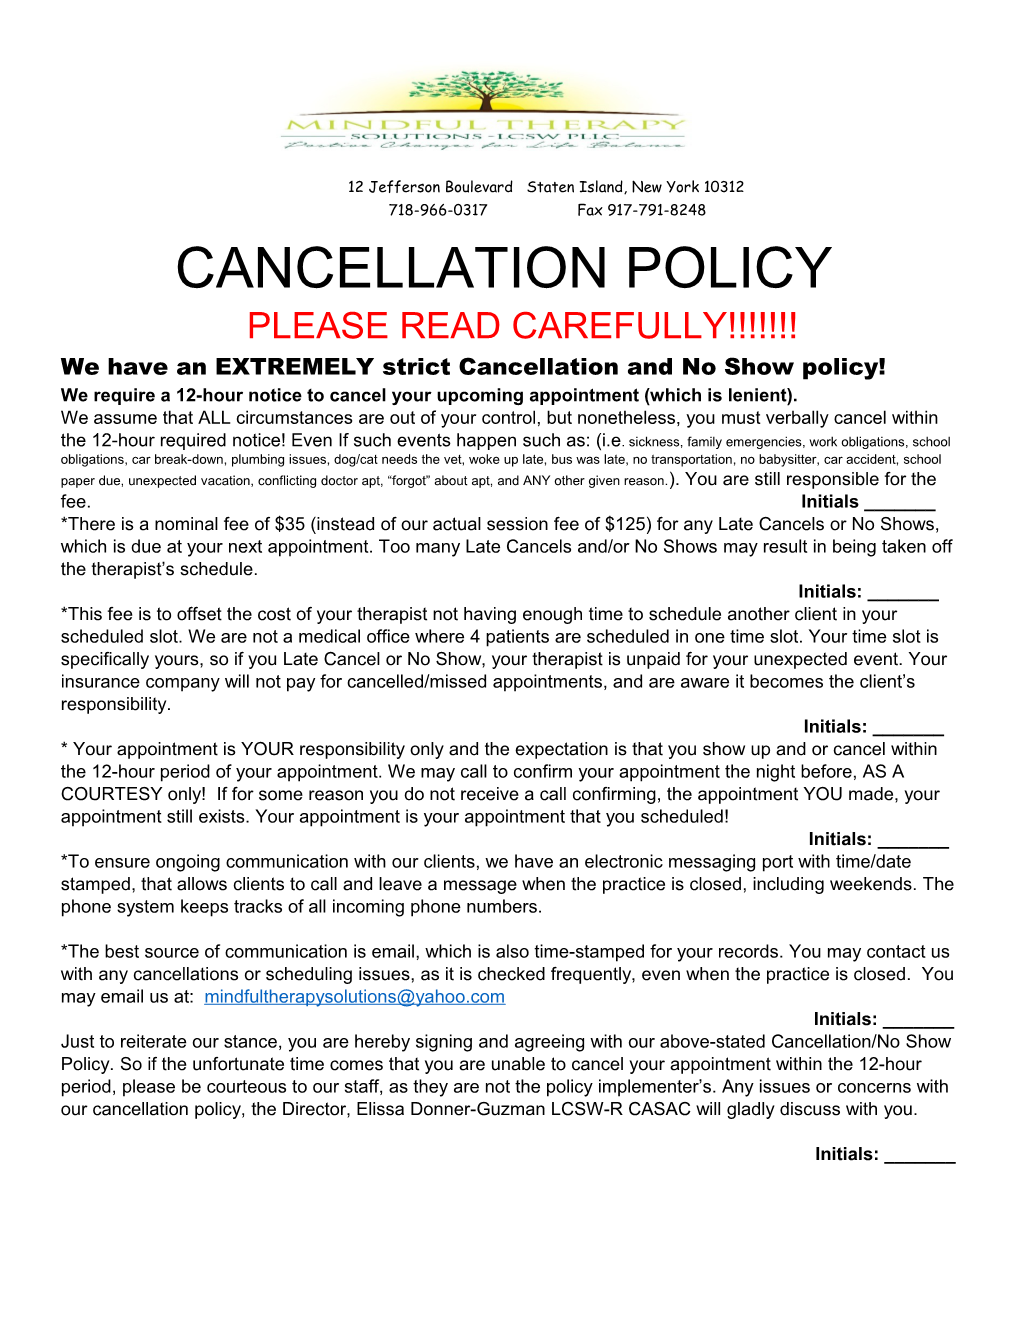 We Have an EXTREMELY Strict Cancellation and No Show Policy!